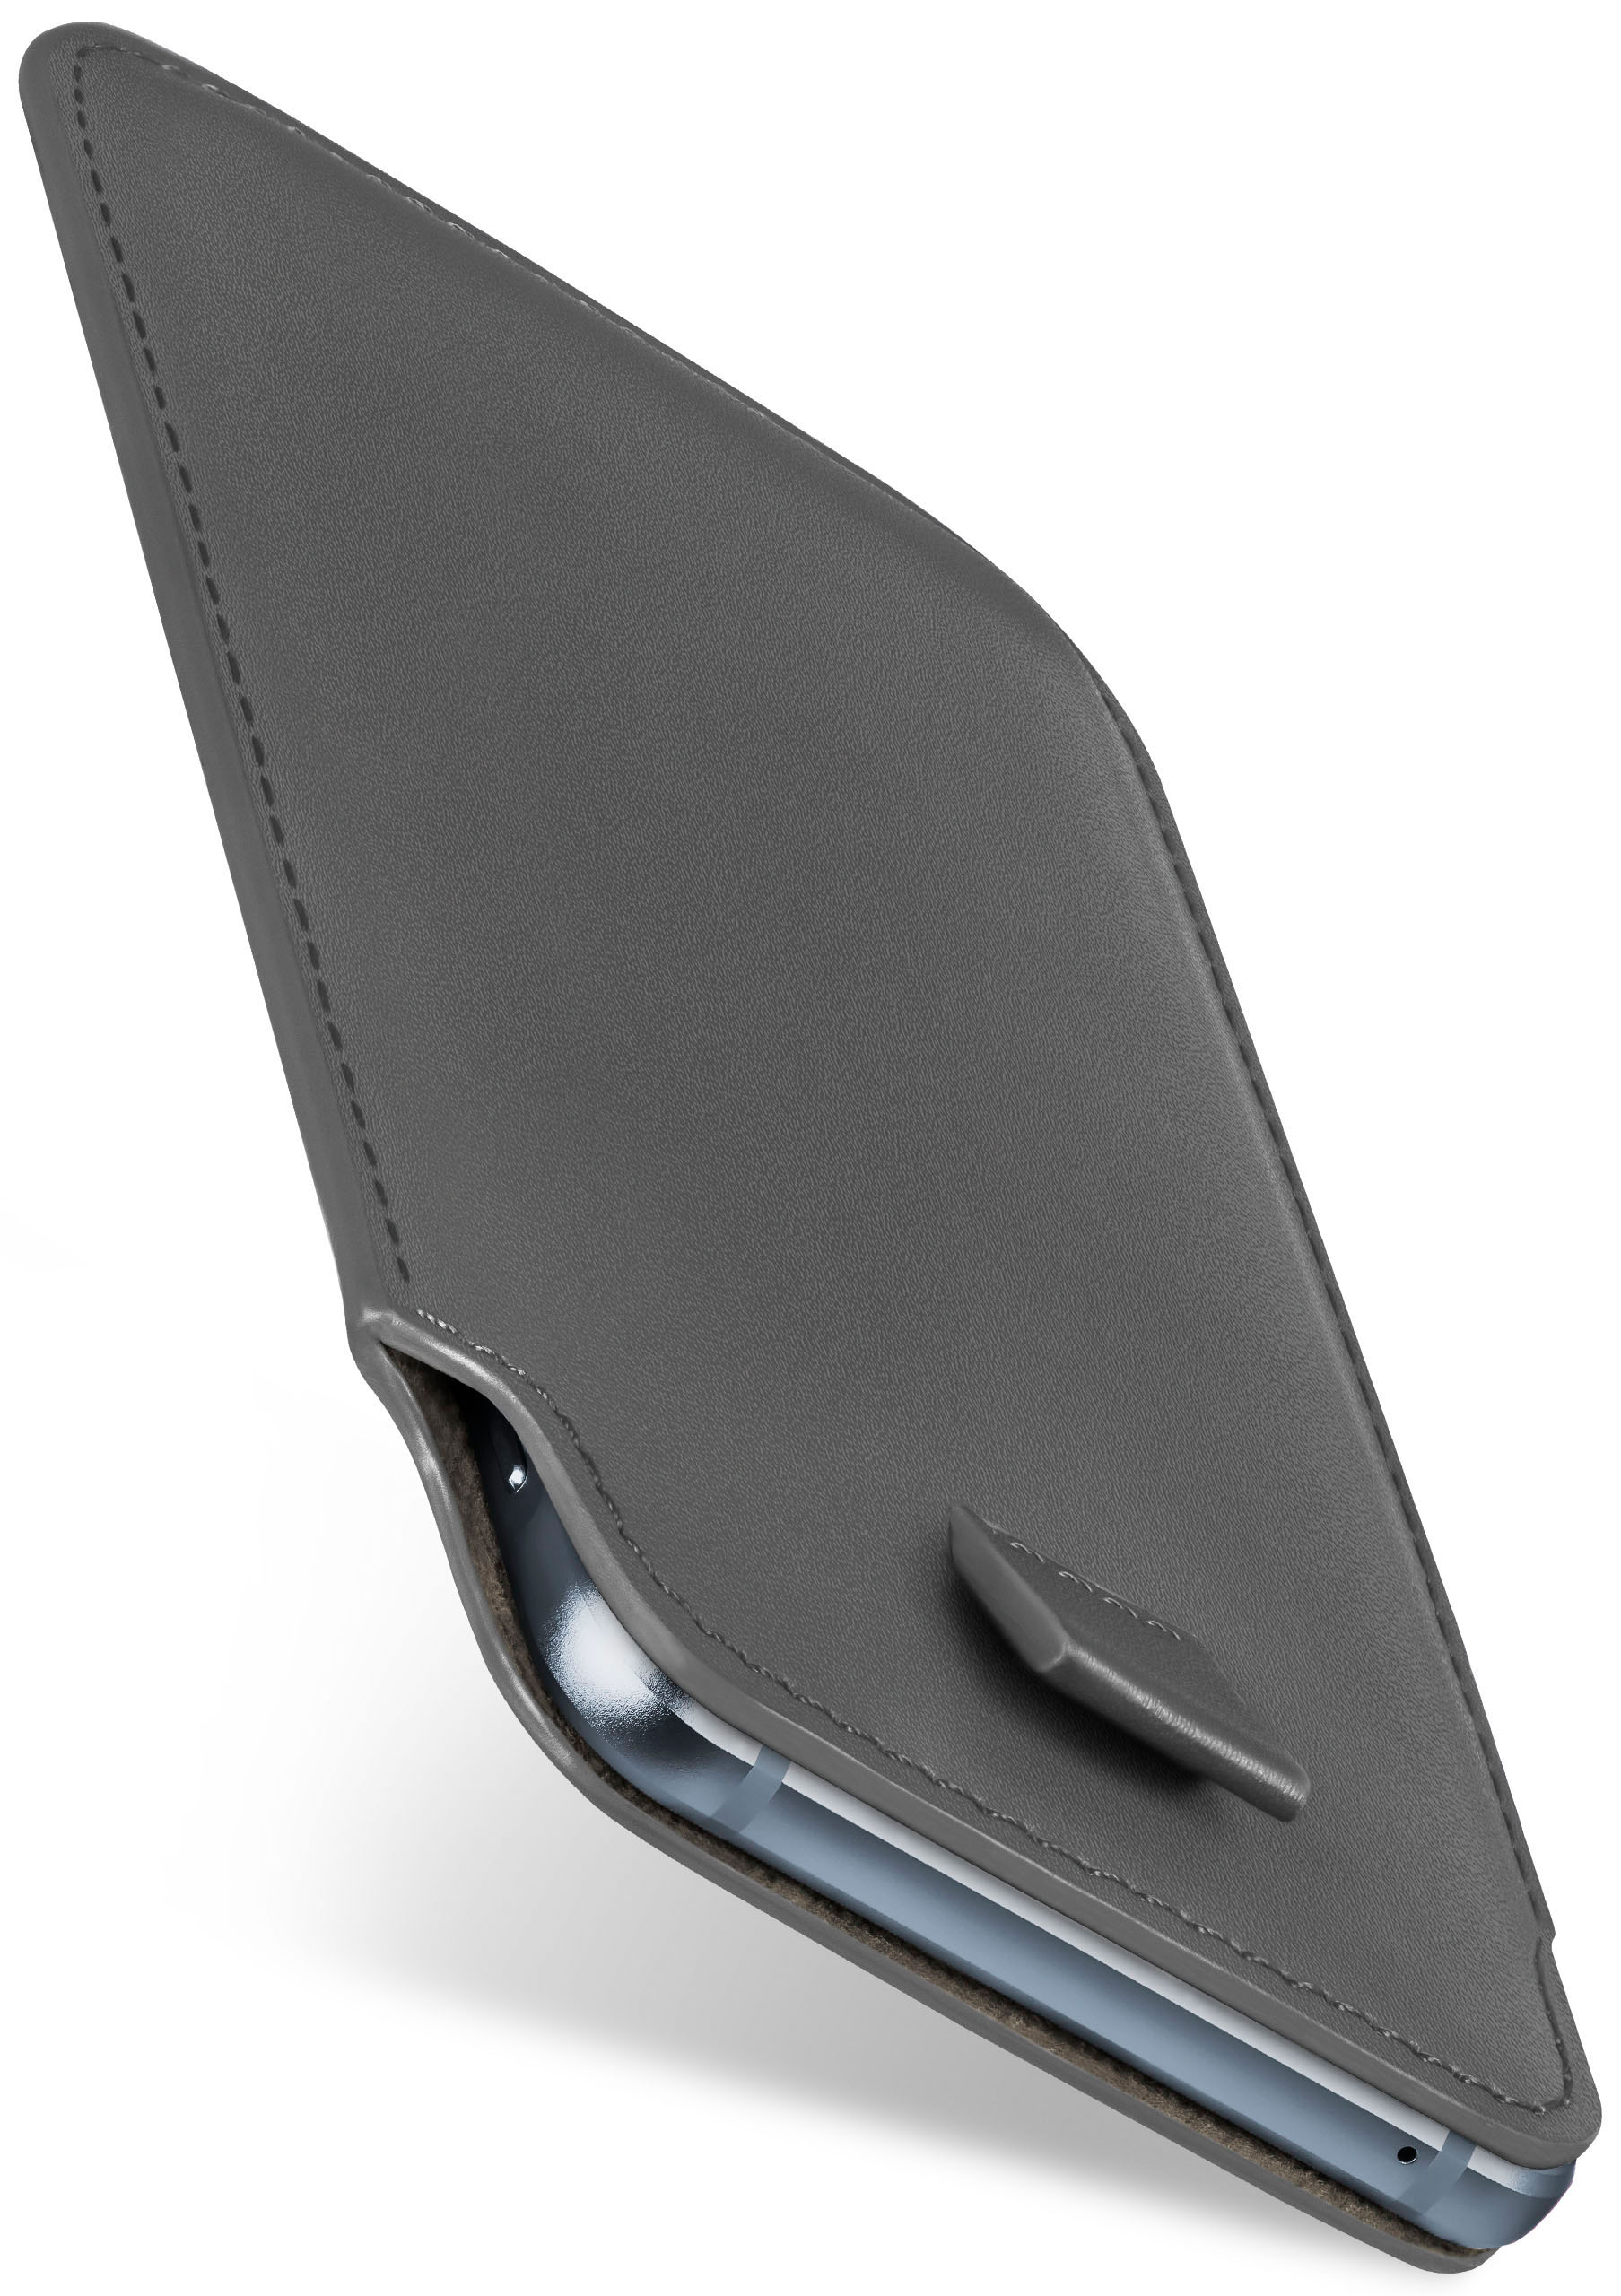 Anthracite-Gray Slide MOEX G7 G7 Full LG, ThinQ Fit, Cover, / Case,